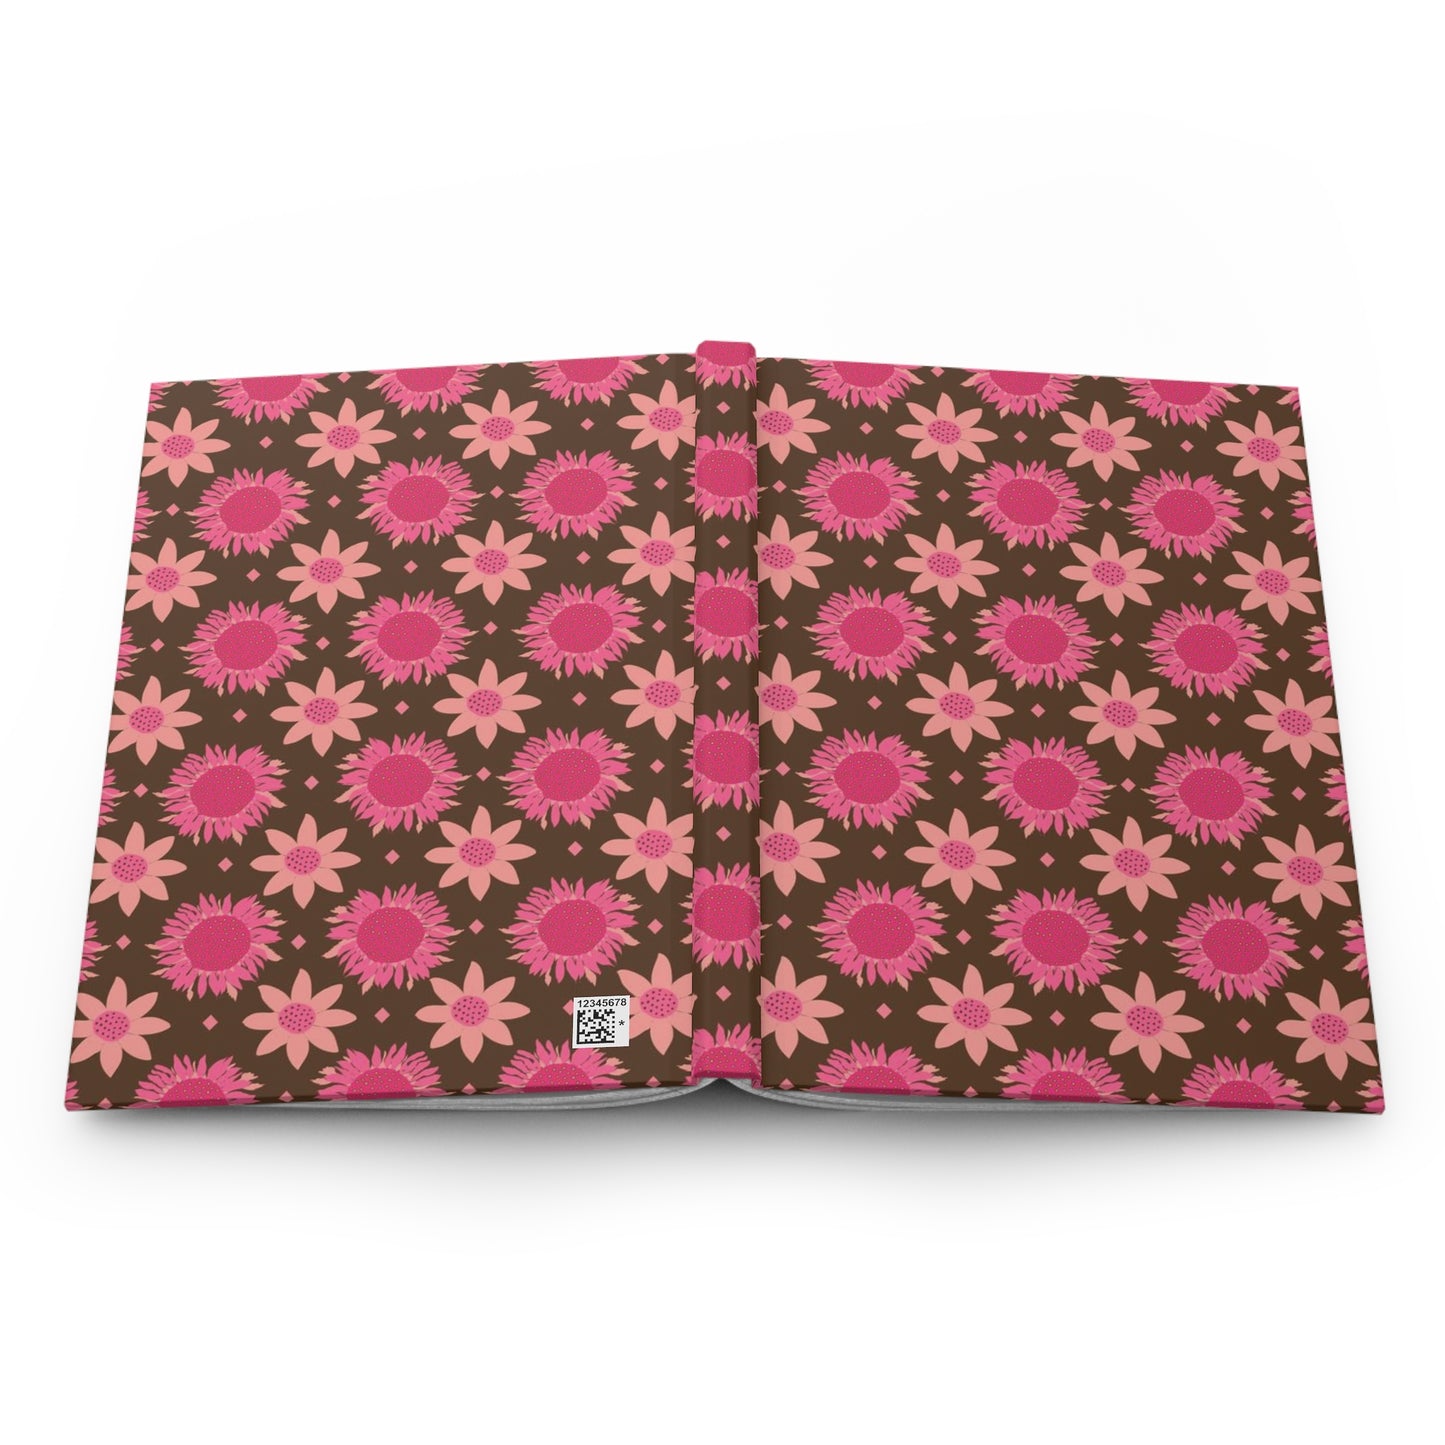 Retro Pink Sunflowers on Brown Background Hardcover Journal Matte